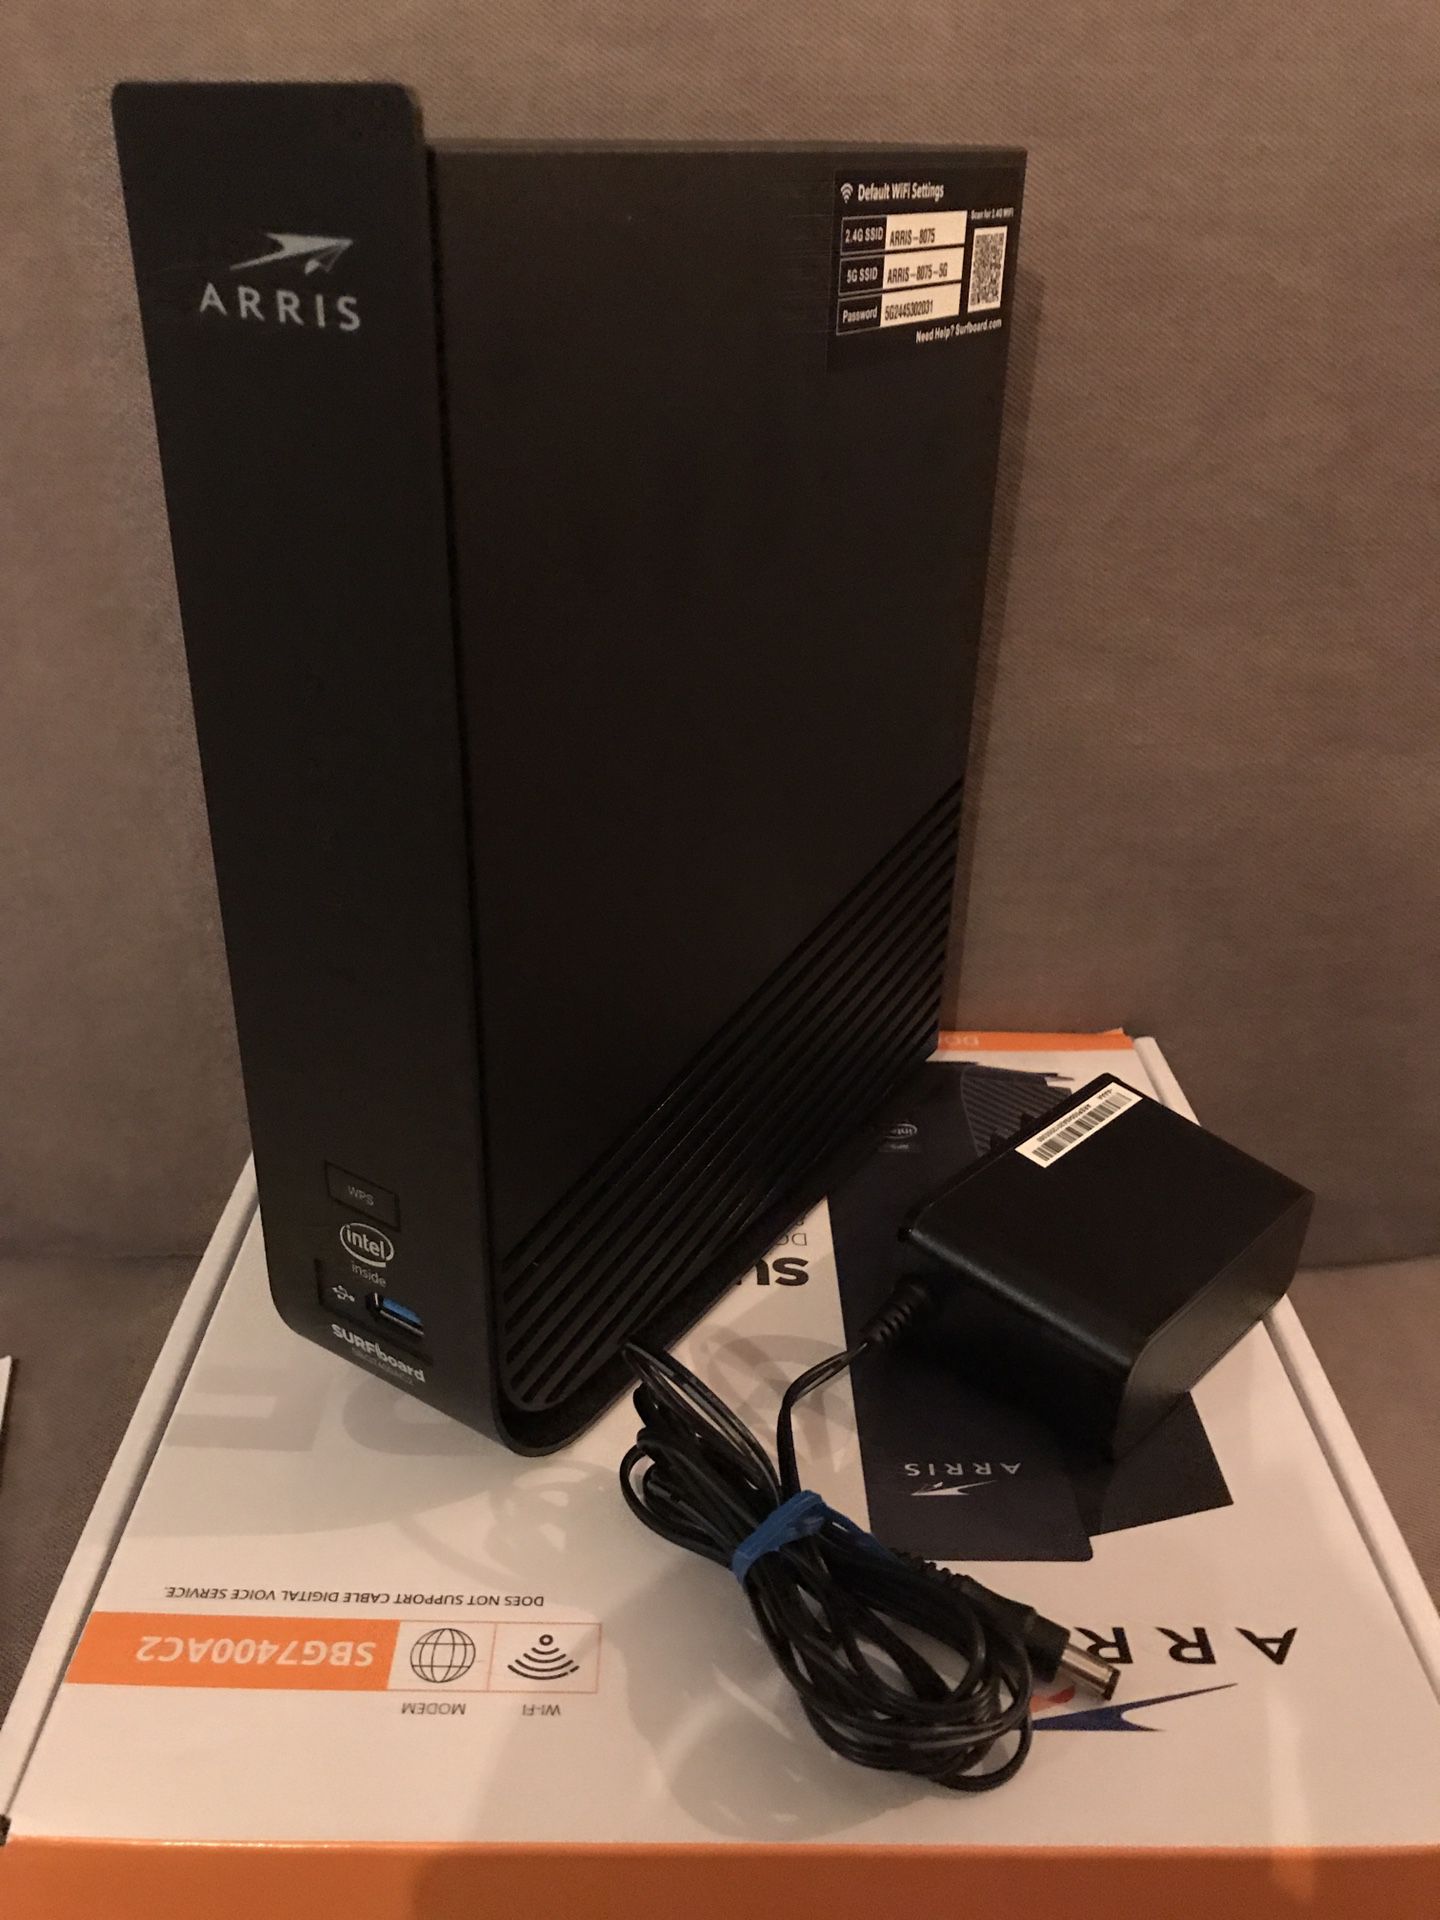 ARRIS SURFboard SBG7400AC2 Cable Modem & Wifi Router- Comcast, Xfinity, Cox